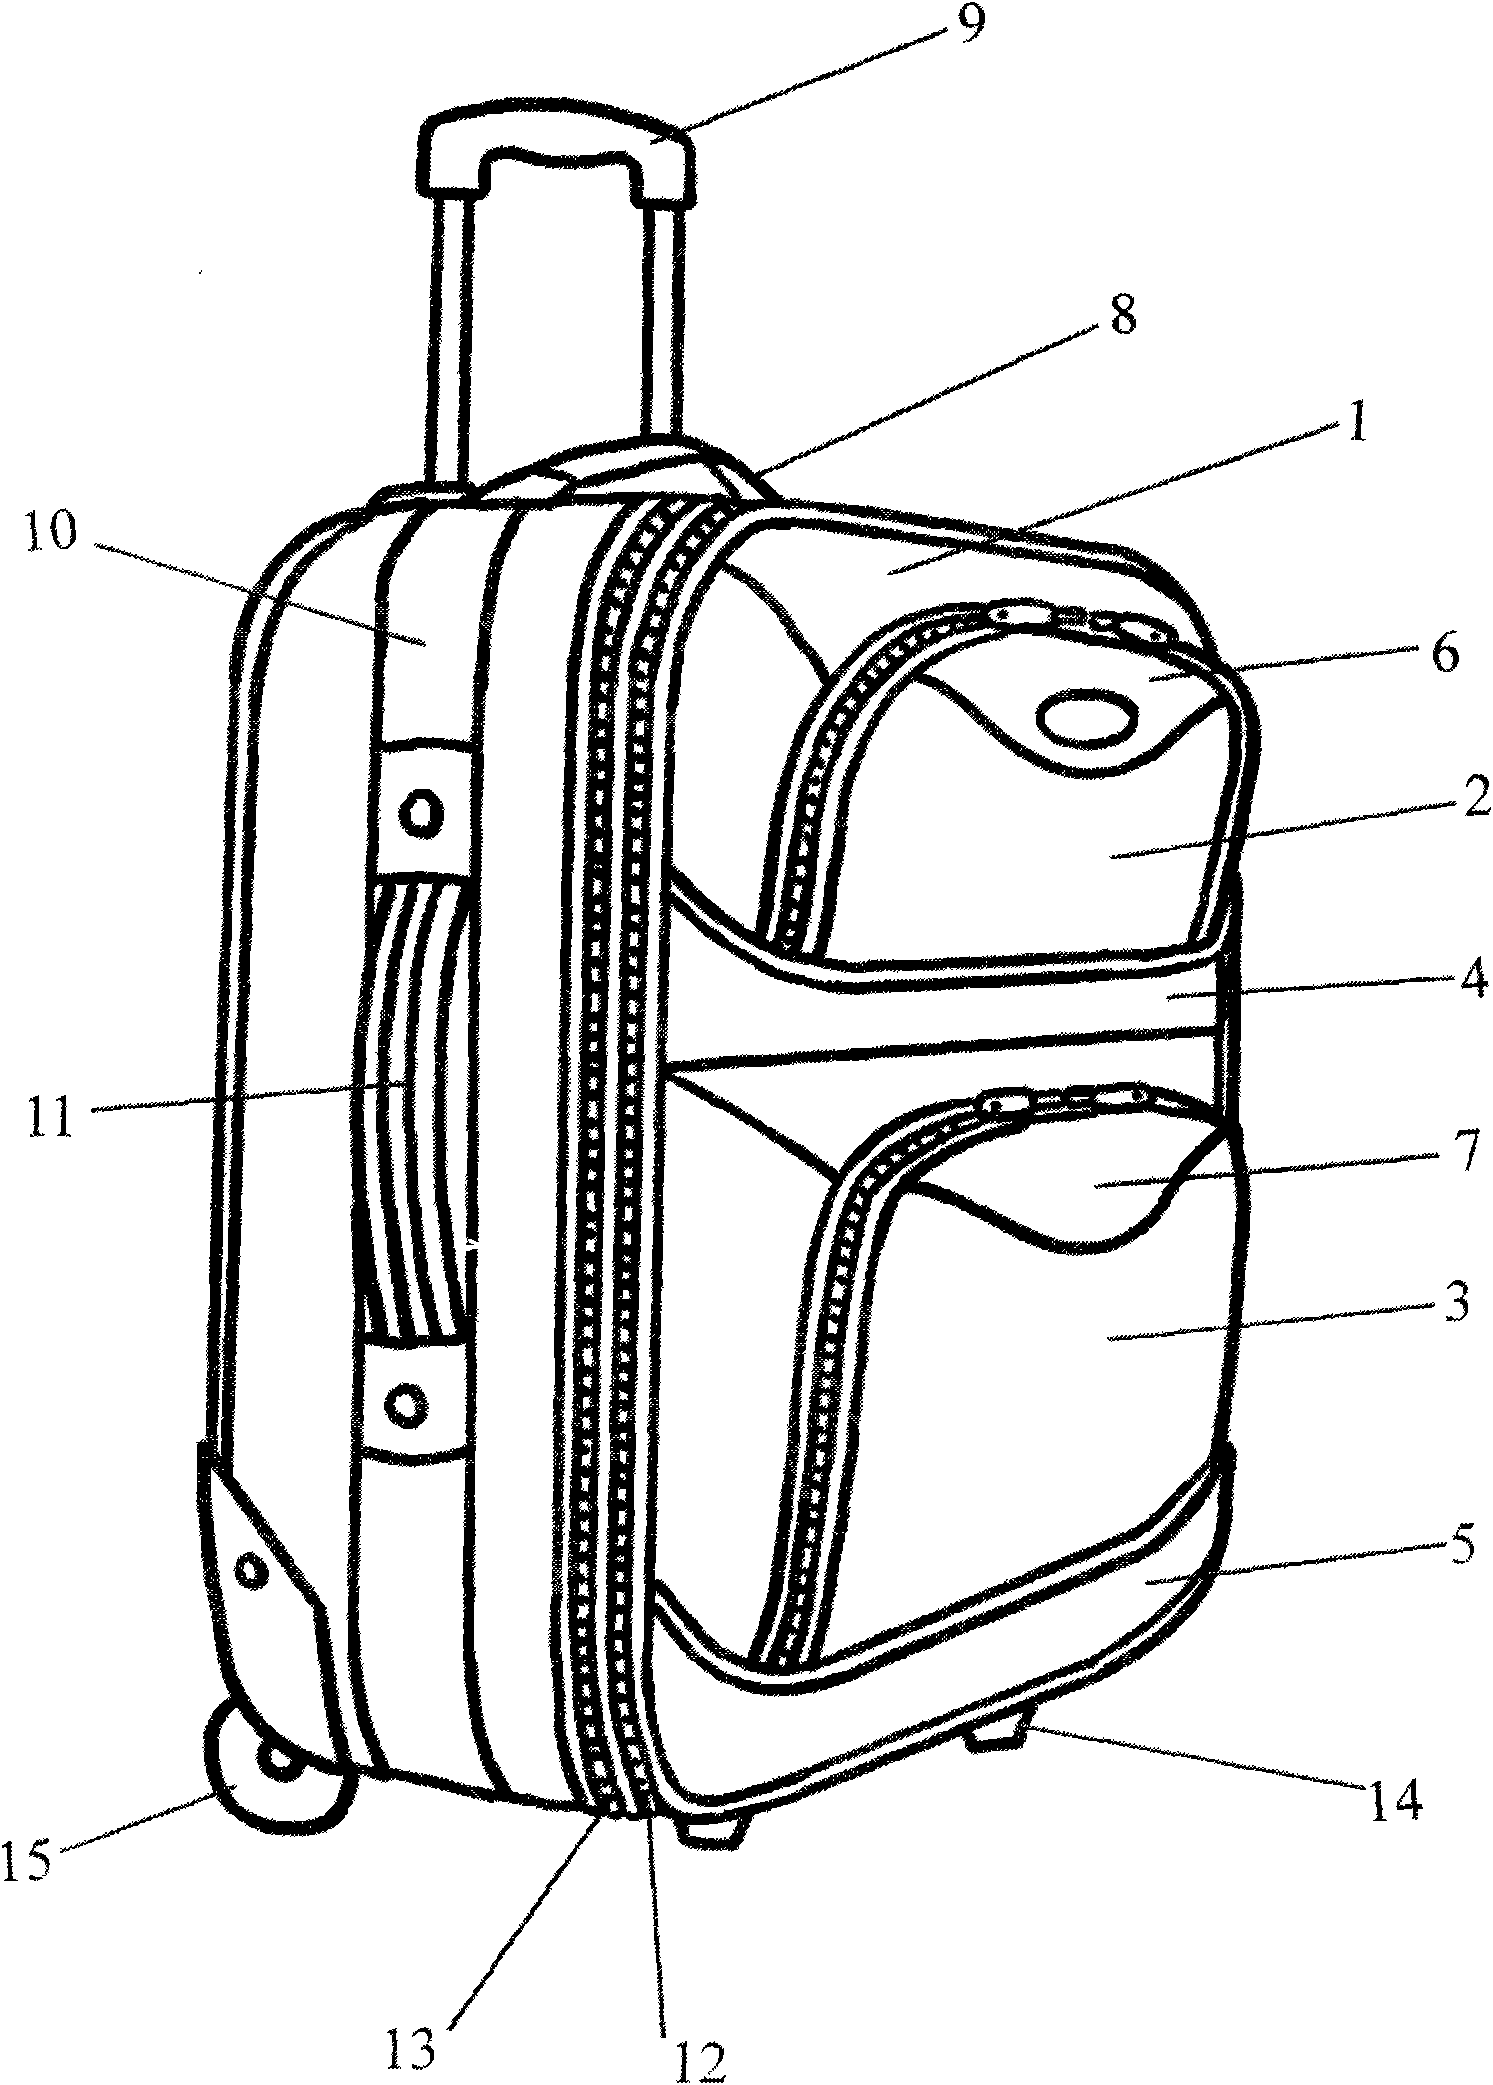 Pull-rod case with iron bar supporting feet and pocket supporting cloths